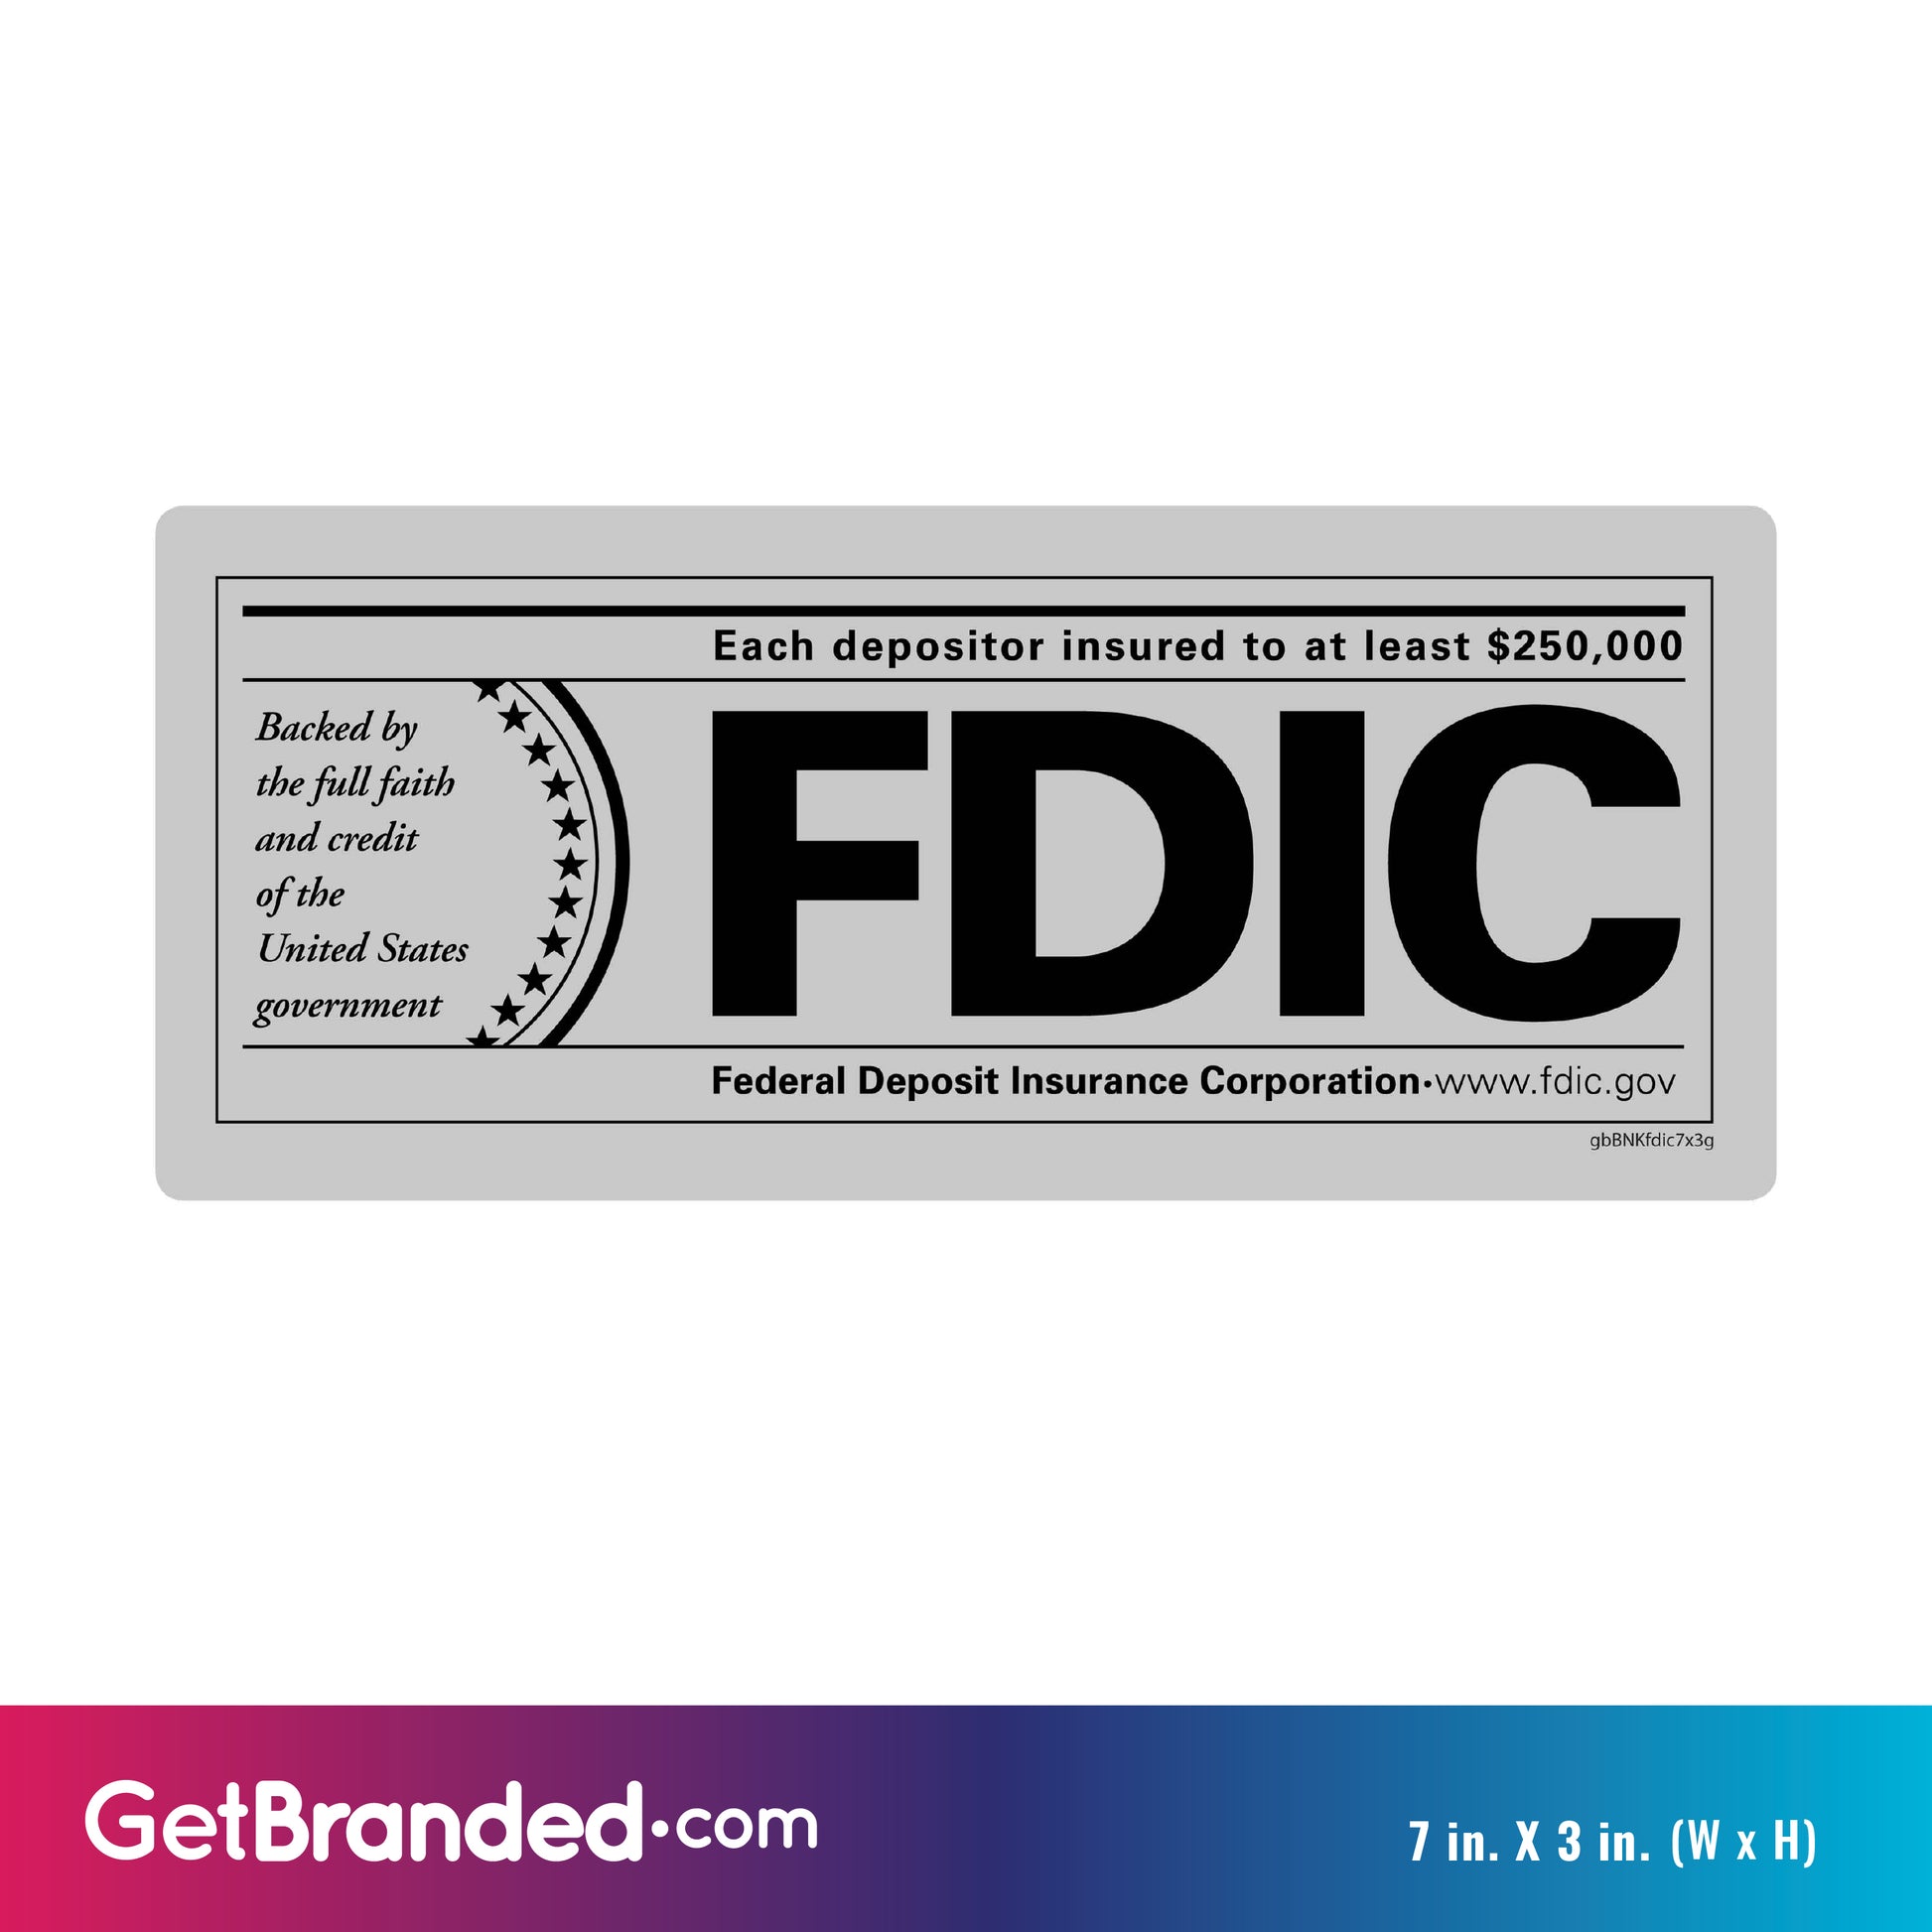 FDIC Gray and Black Decal size guide.